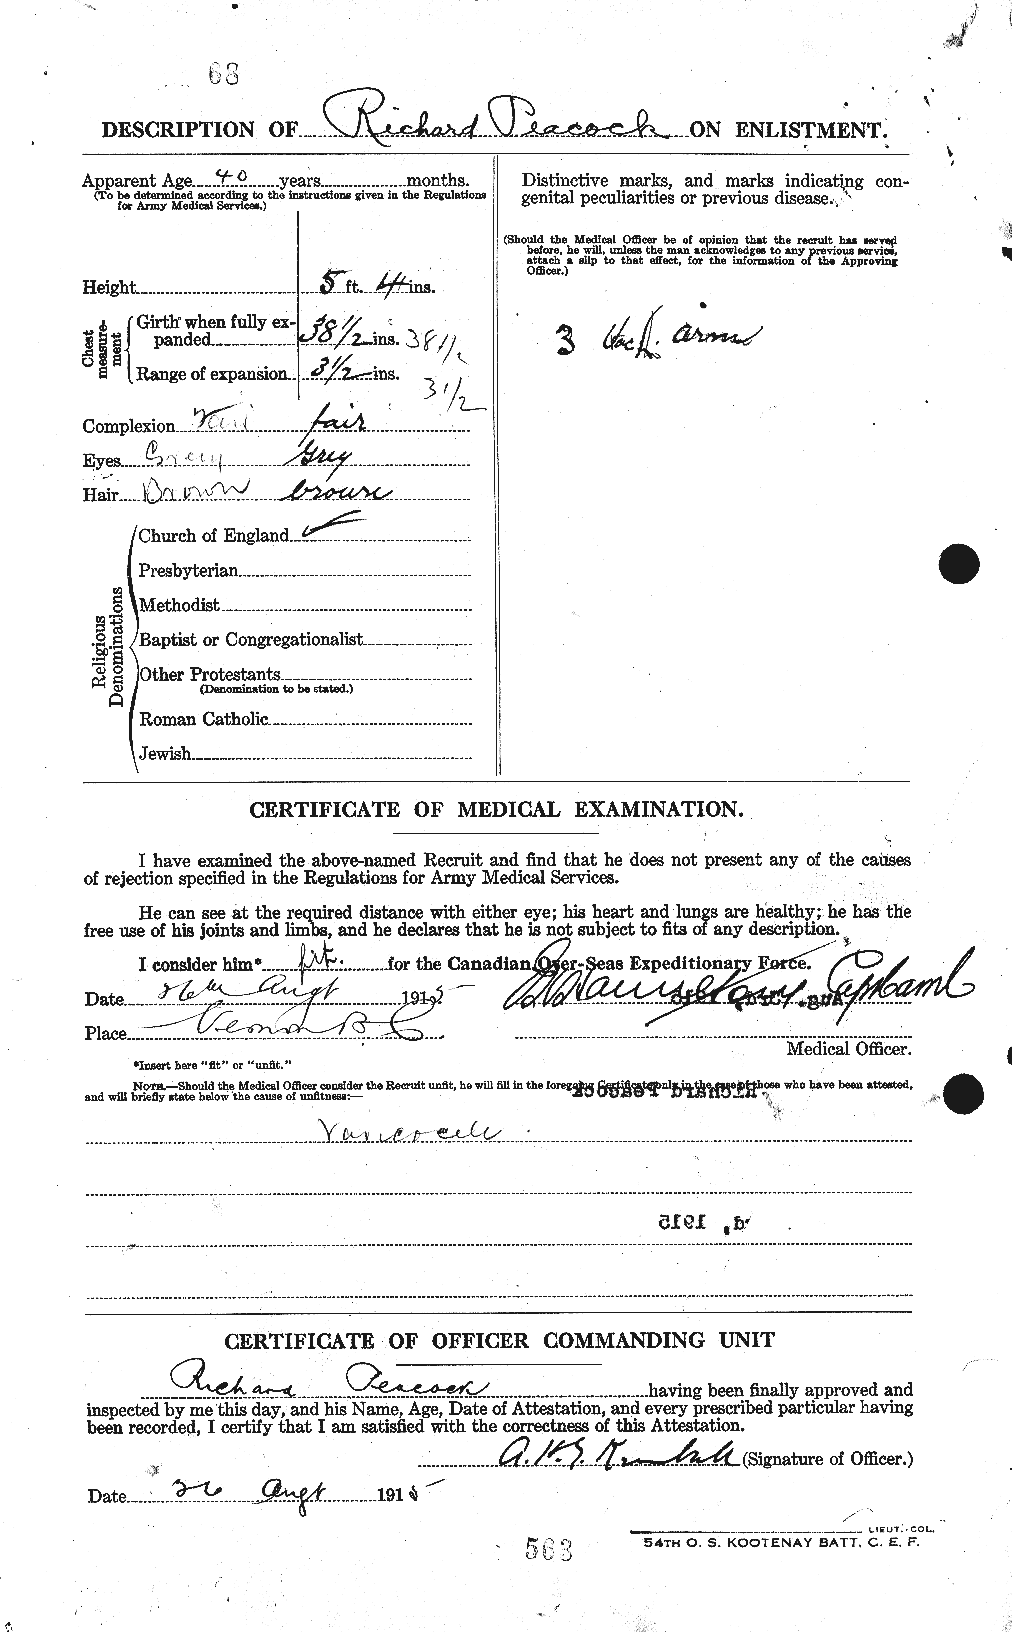 Personnel Records of the First World War - CEF 570398b